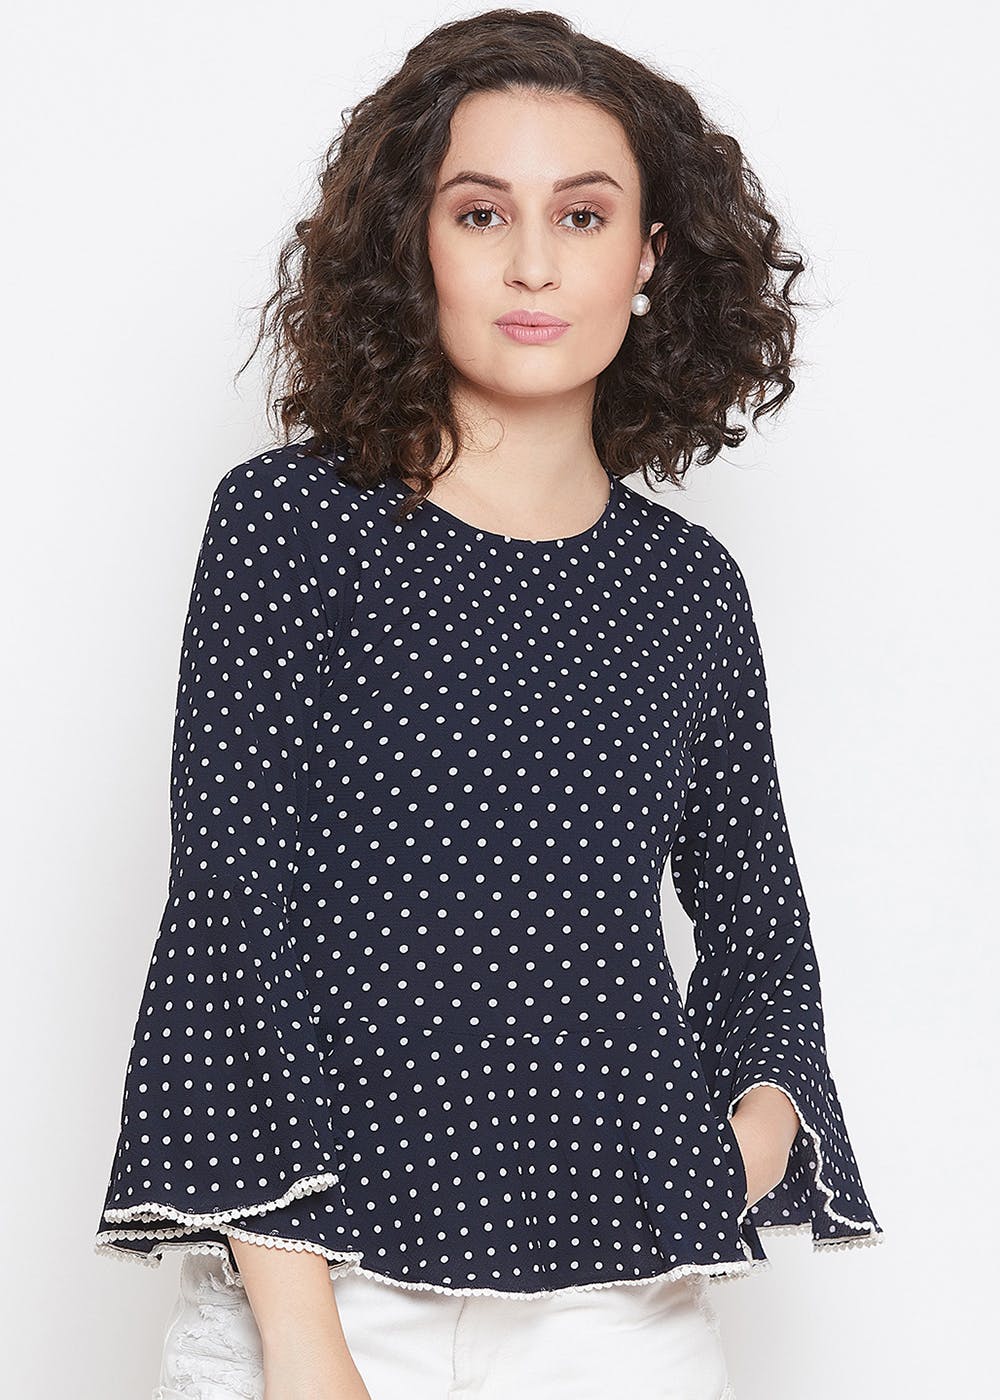 Lace Trim Detail Polka Dotted Black Top